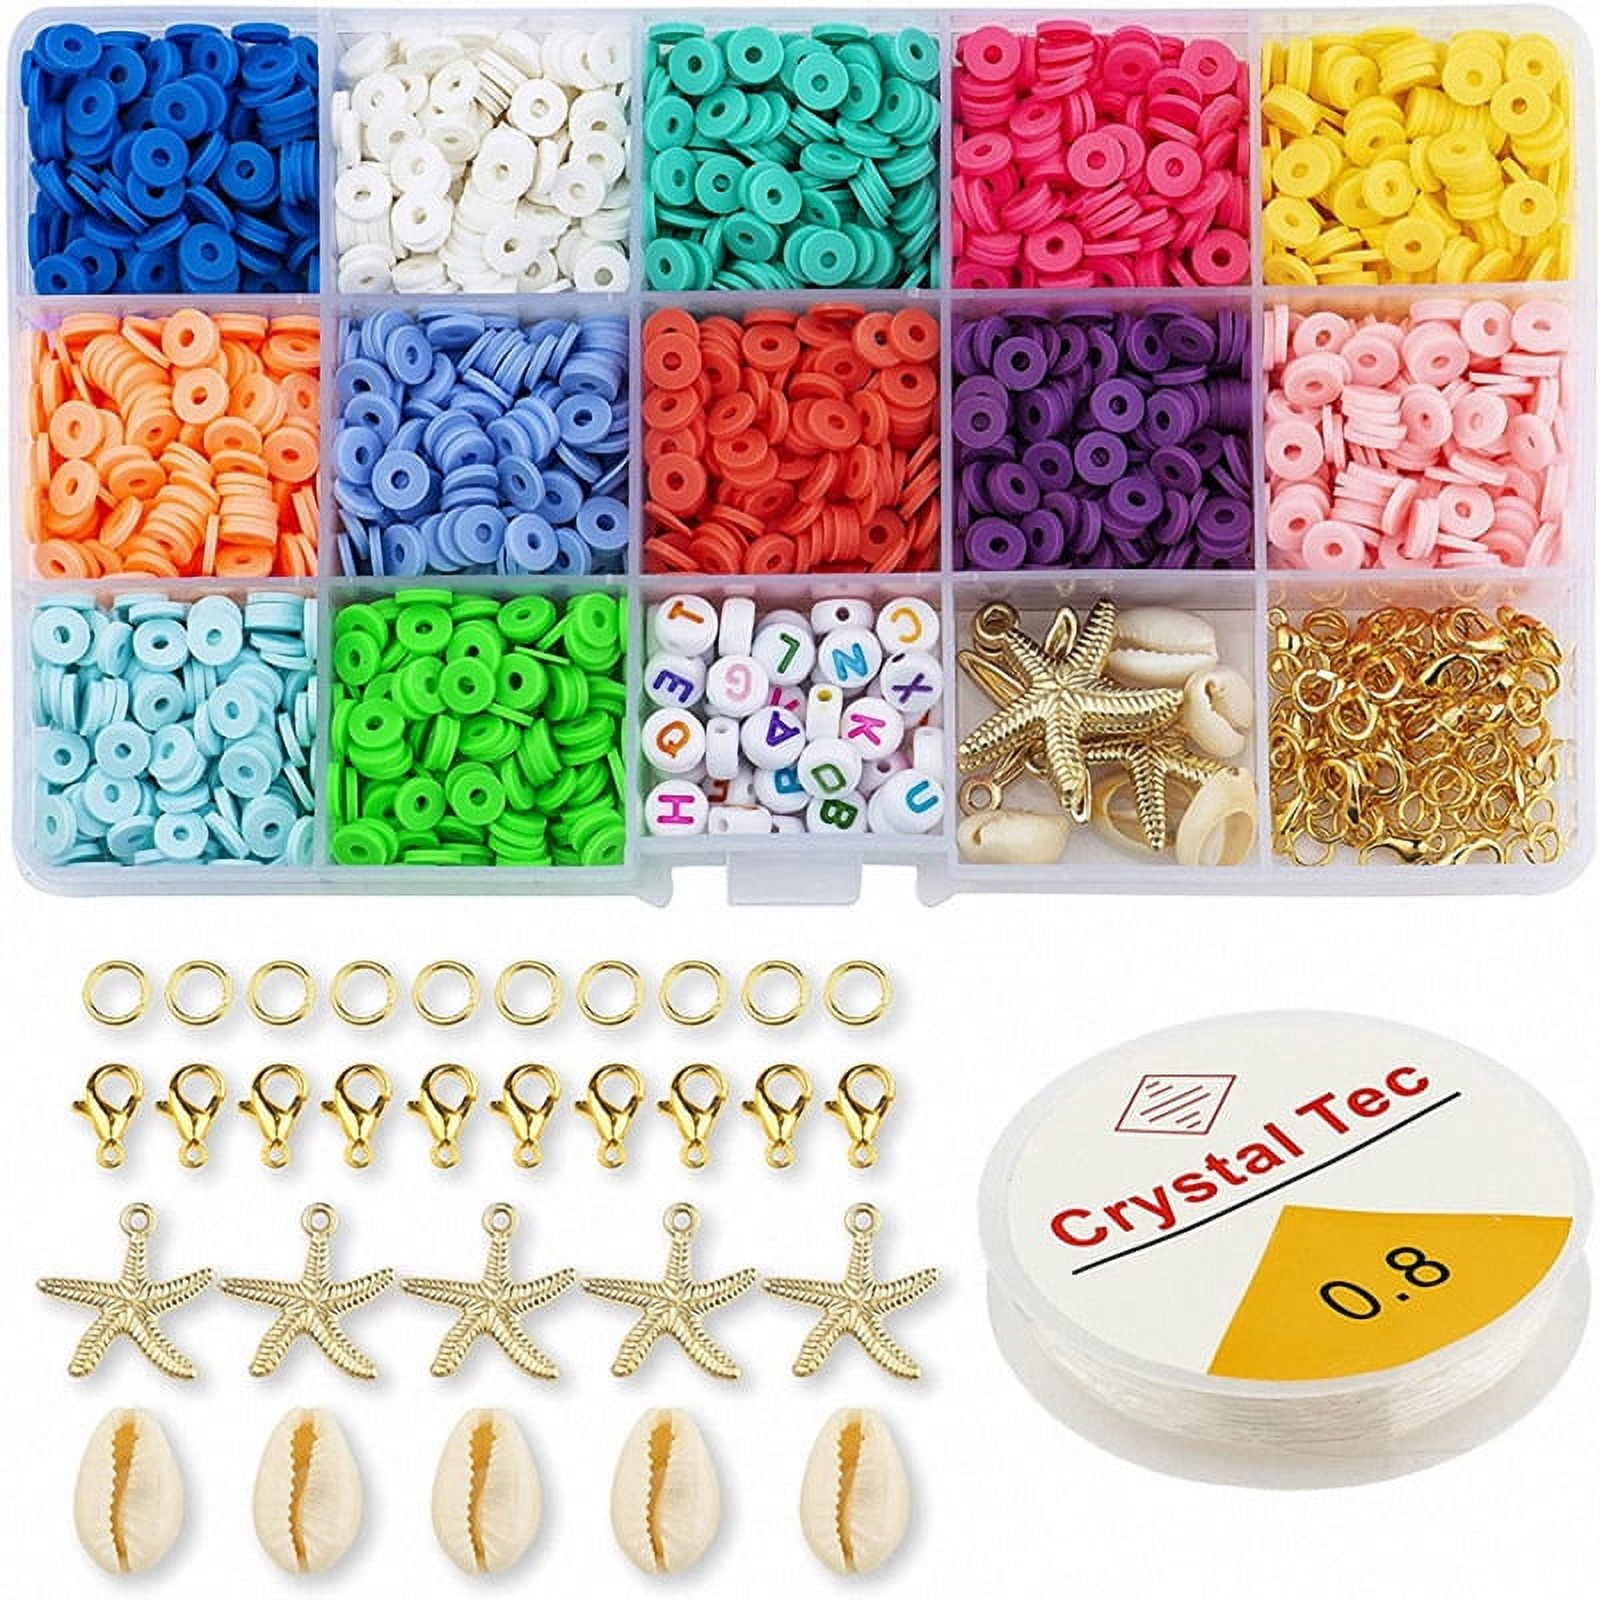 9362 Pcs 72 color clay beads bracelet making craft kit, DIY necklace  bracelet with pendant spacer letter beads and elastic rope - AliExpress